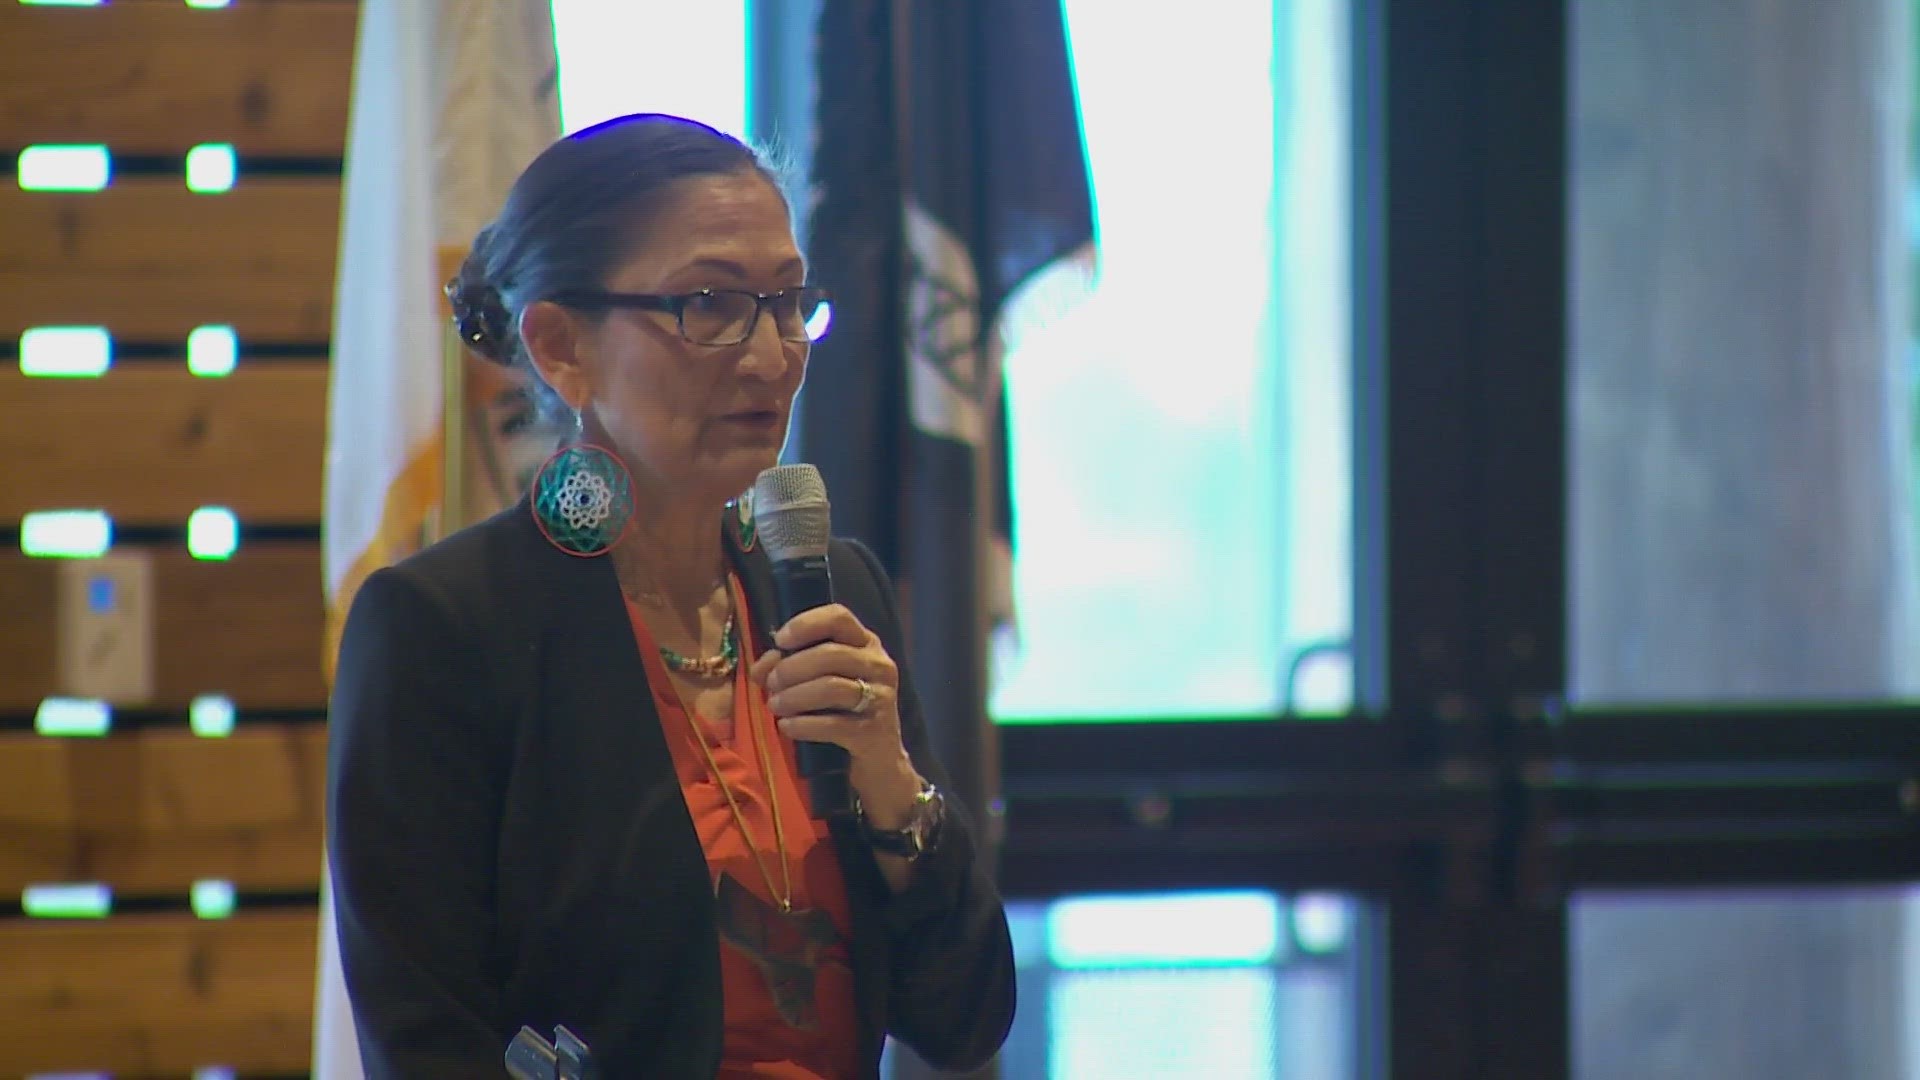 The event in Tulalip was led by Secretary Deb Haaland as part of her yearlong "Road to Healing" tour.